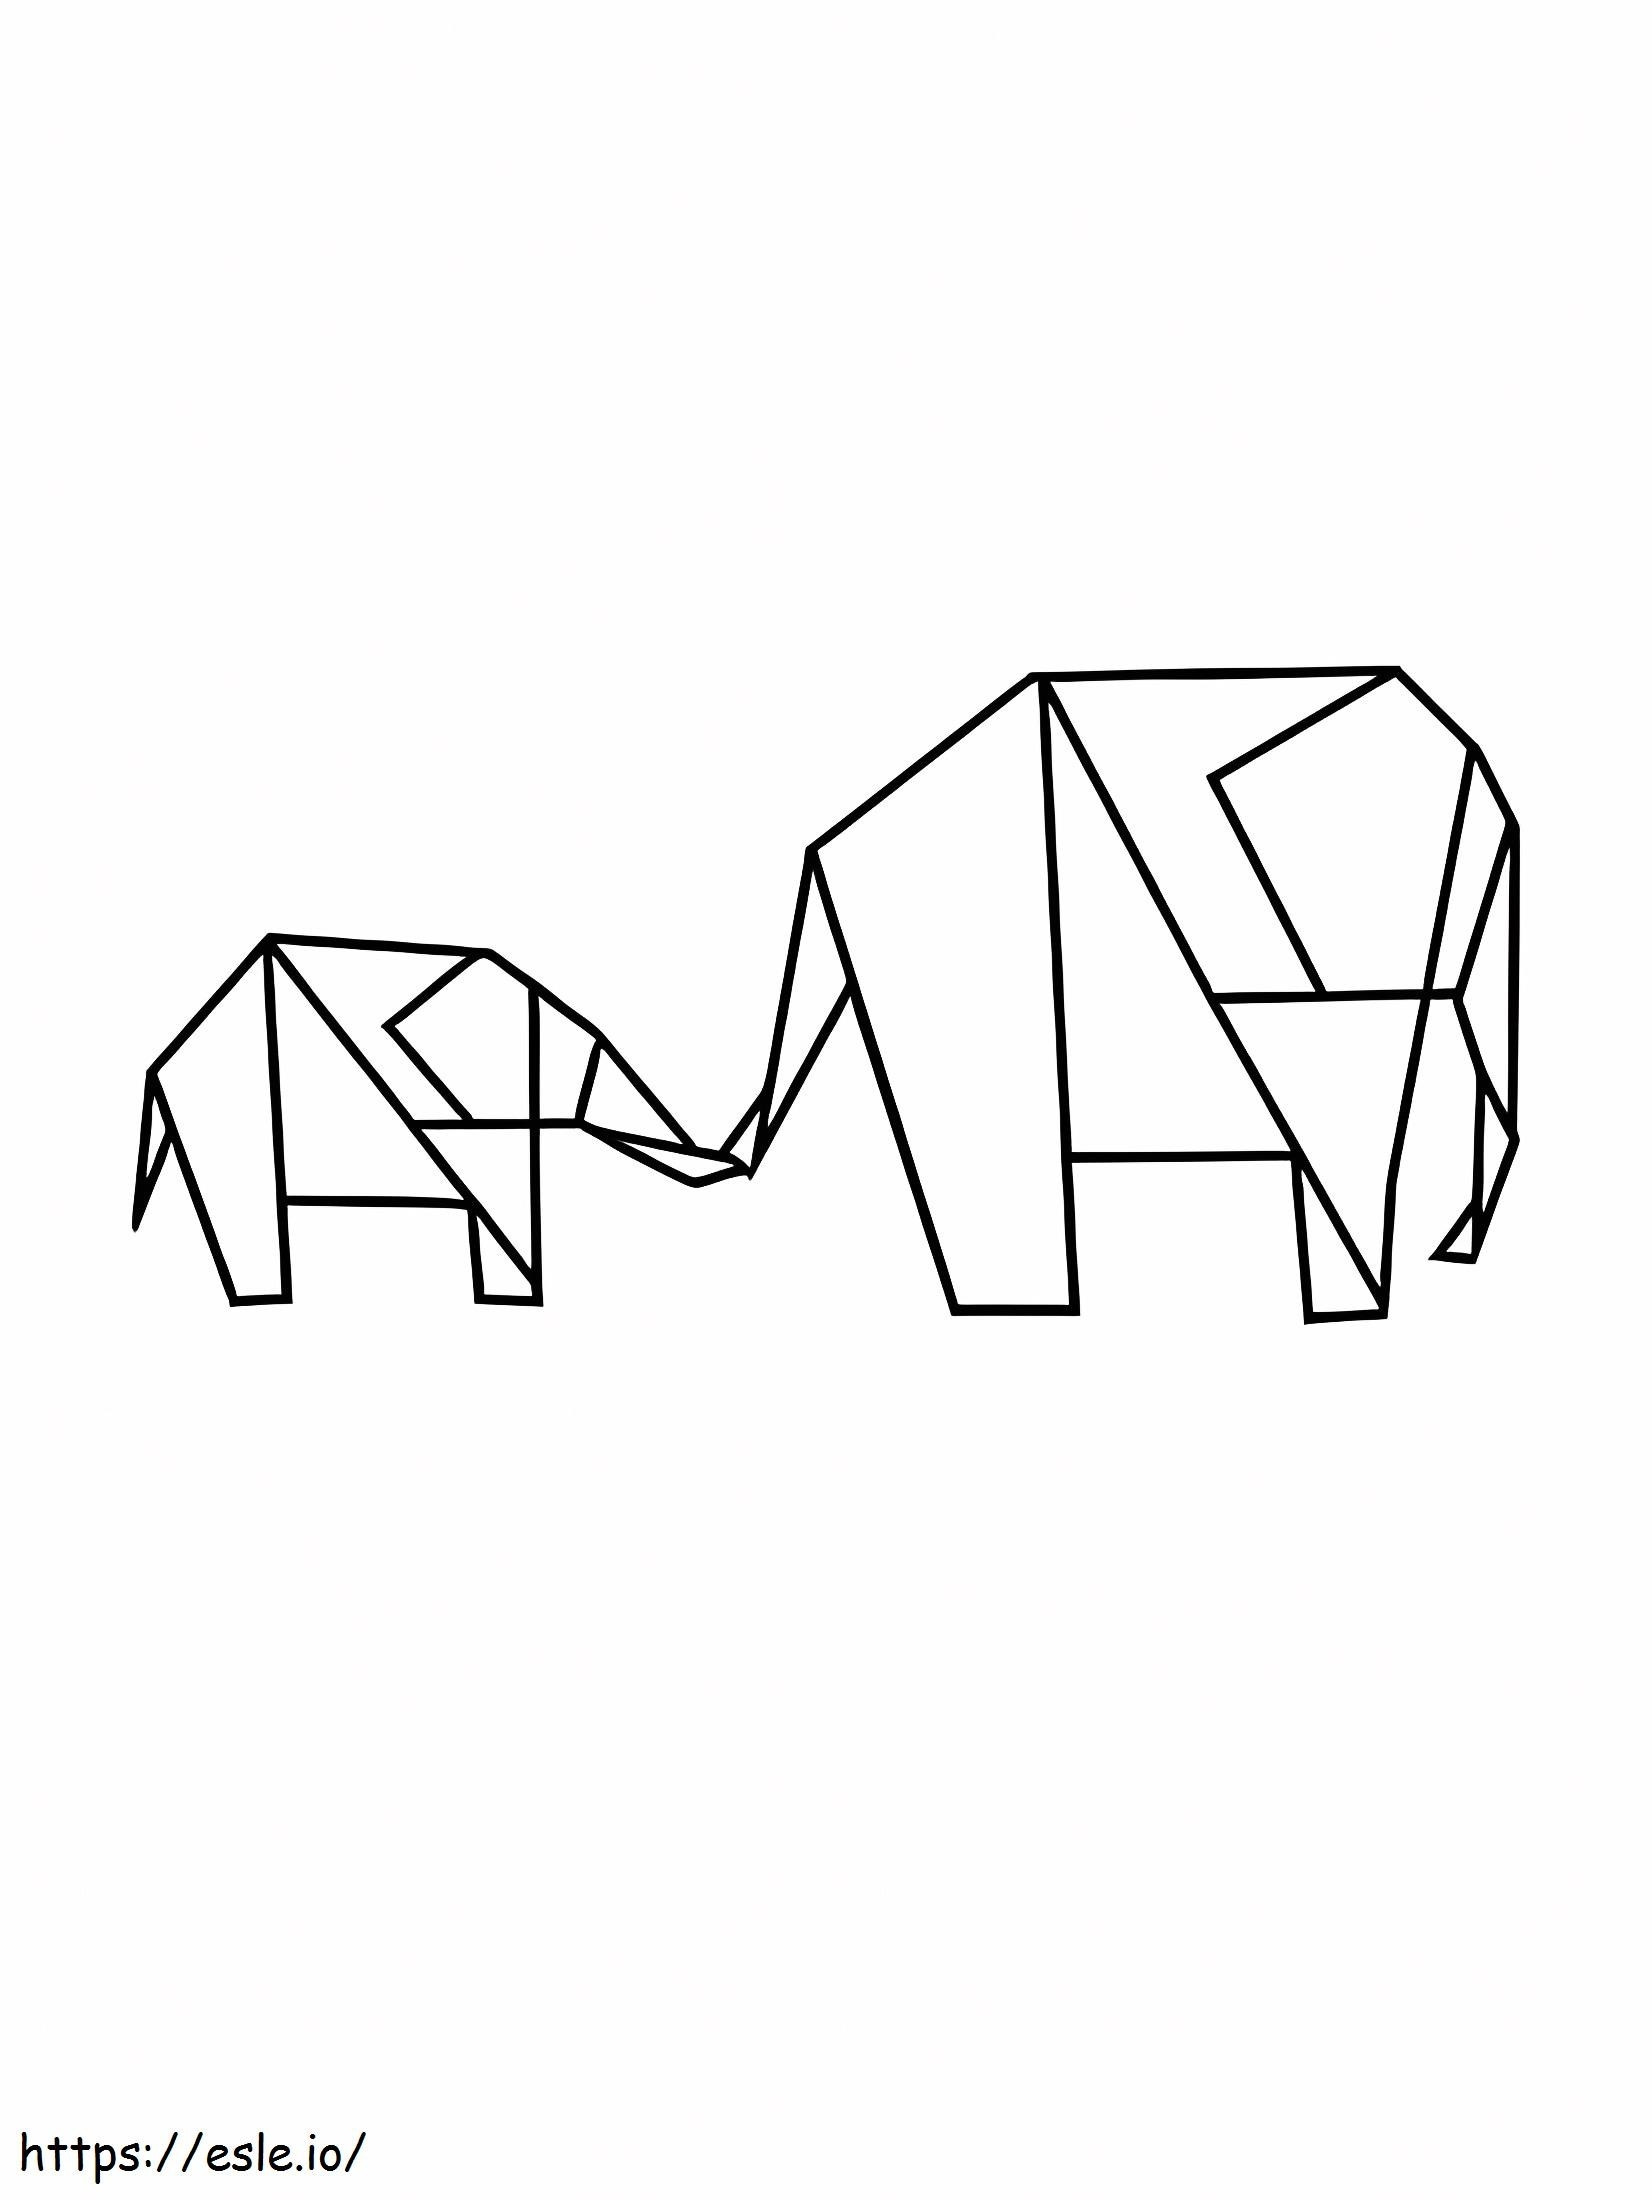 Origami Elephants coloring page